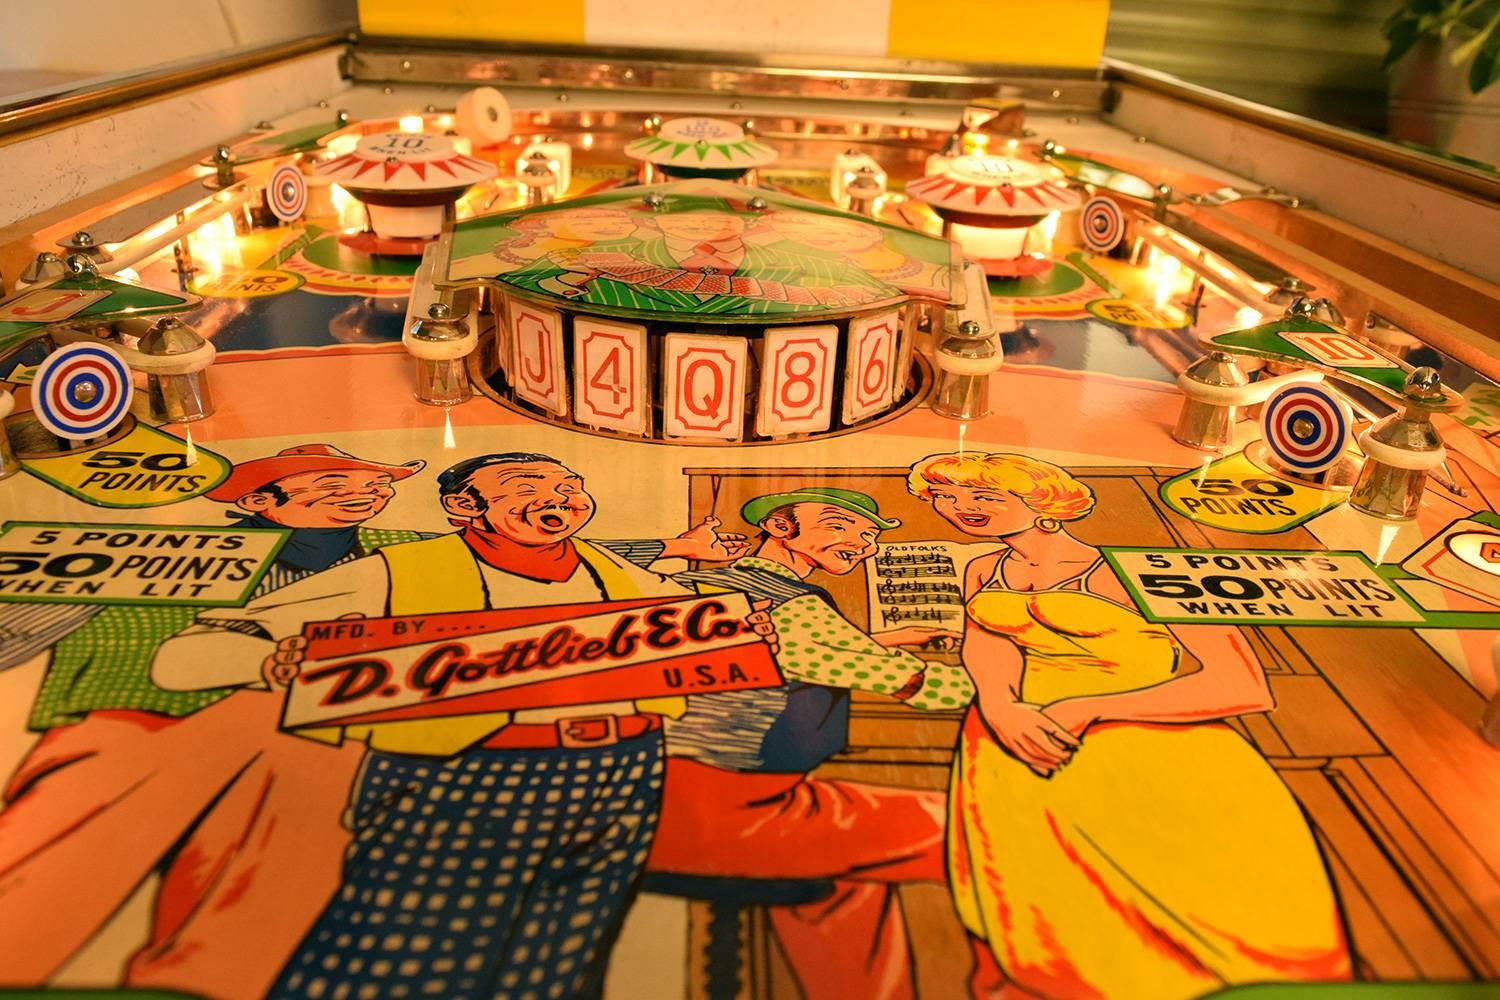 Gottlieb Hit-a-Card, Vintage Pinball Machine 1967, Fully Restored For Sale 1